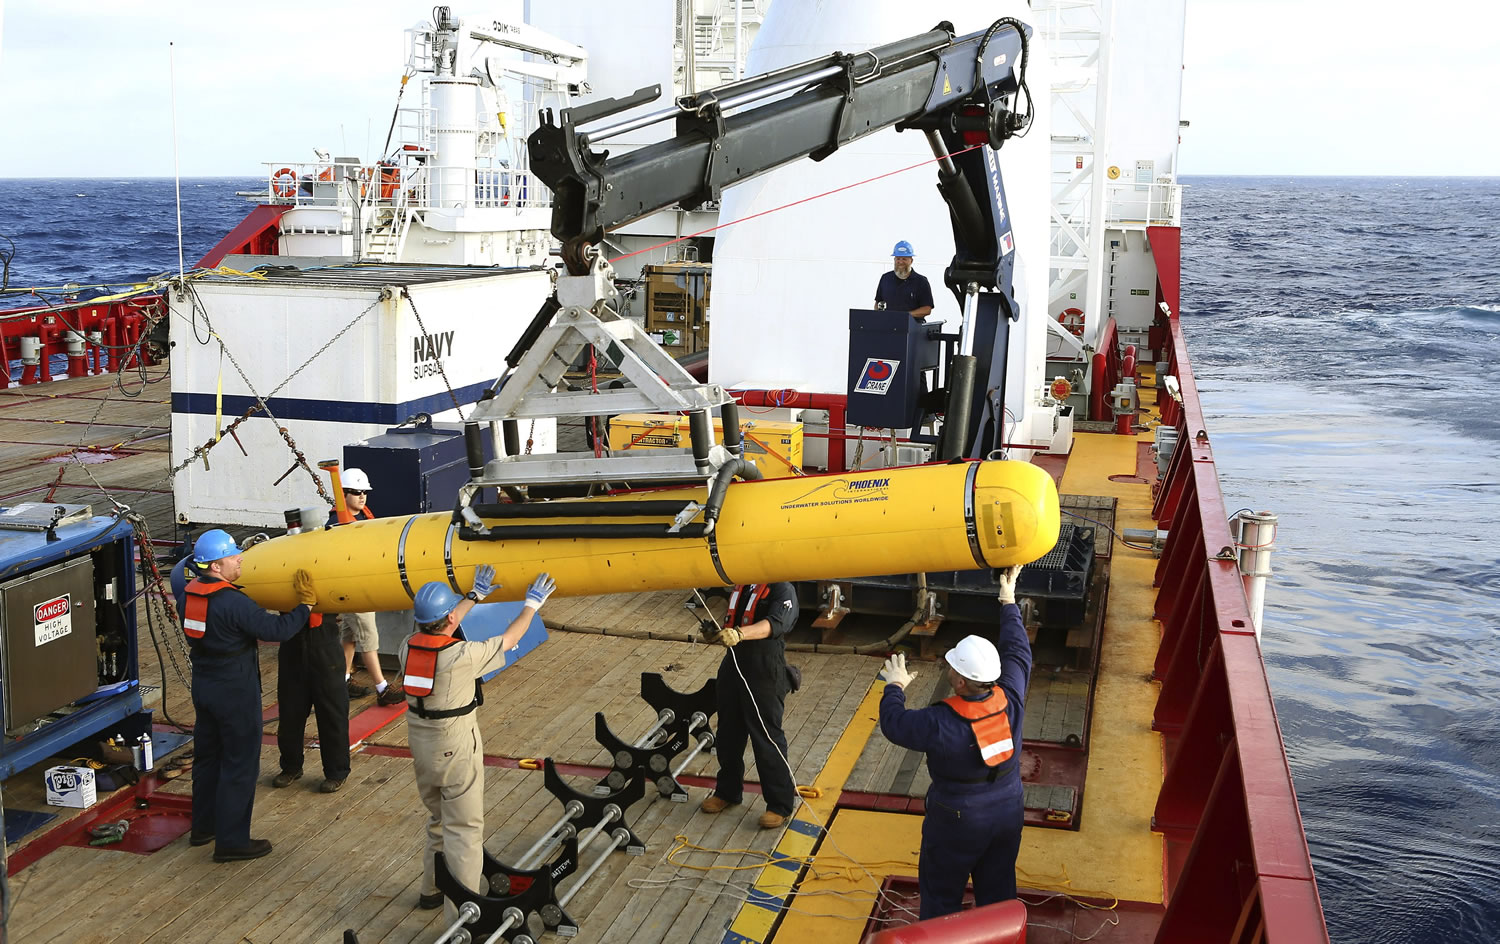 The autonomous underwater vehicle deploys from ADV Ocean Shield in the search of the missing Malaysia Airlines Flight 370 in the southern Indian Ocean on Monday.